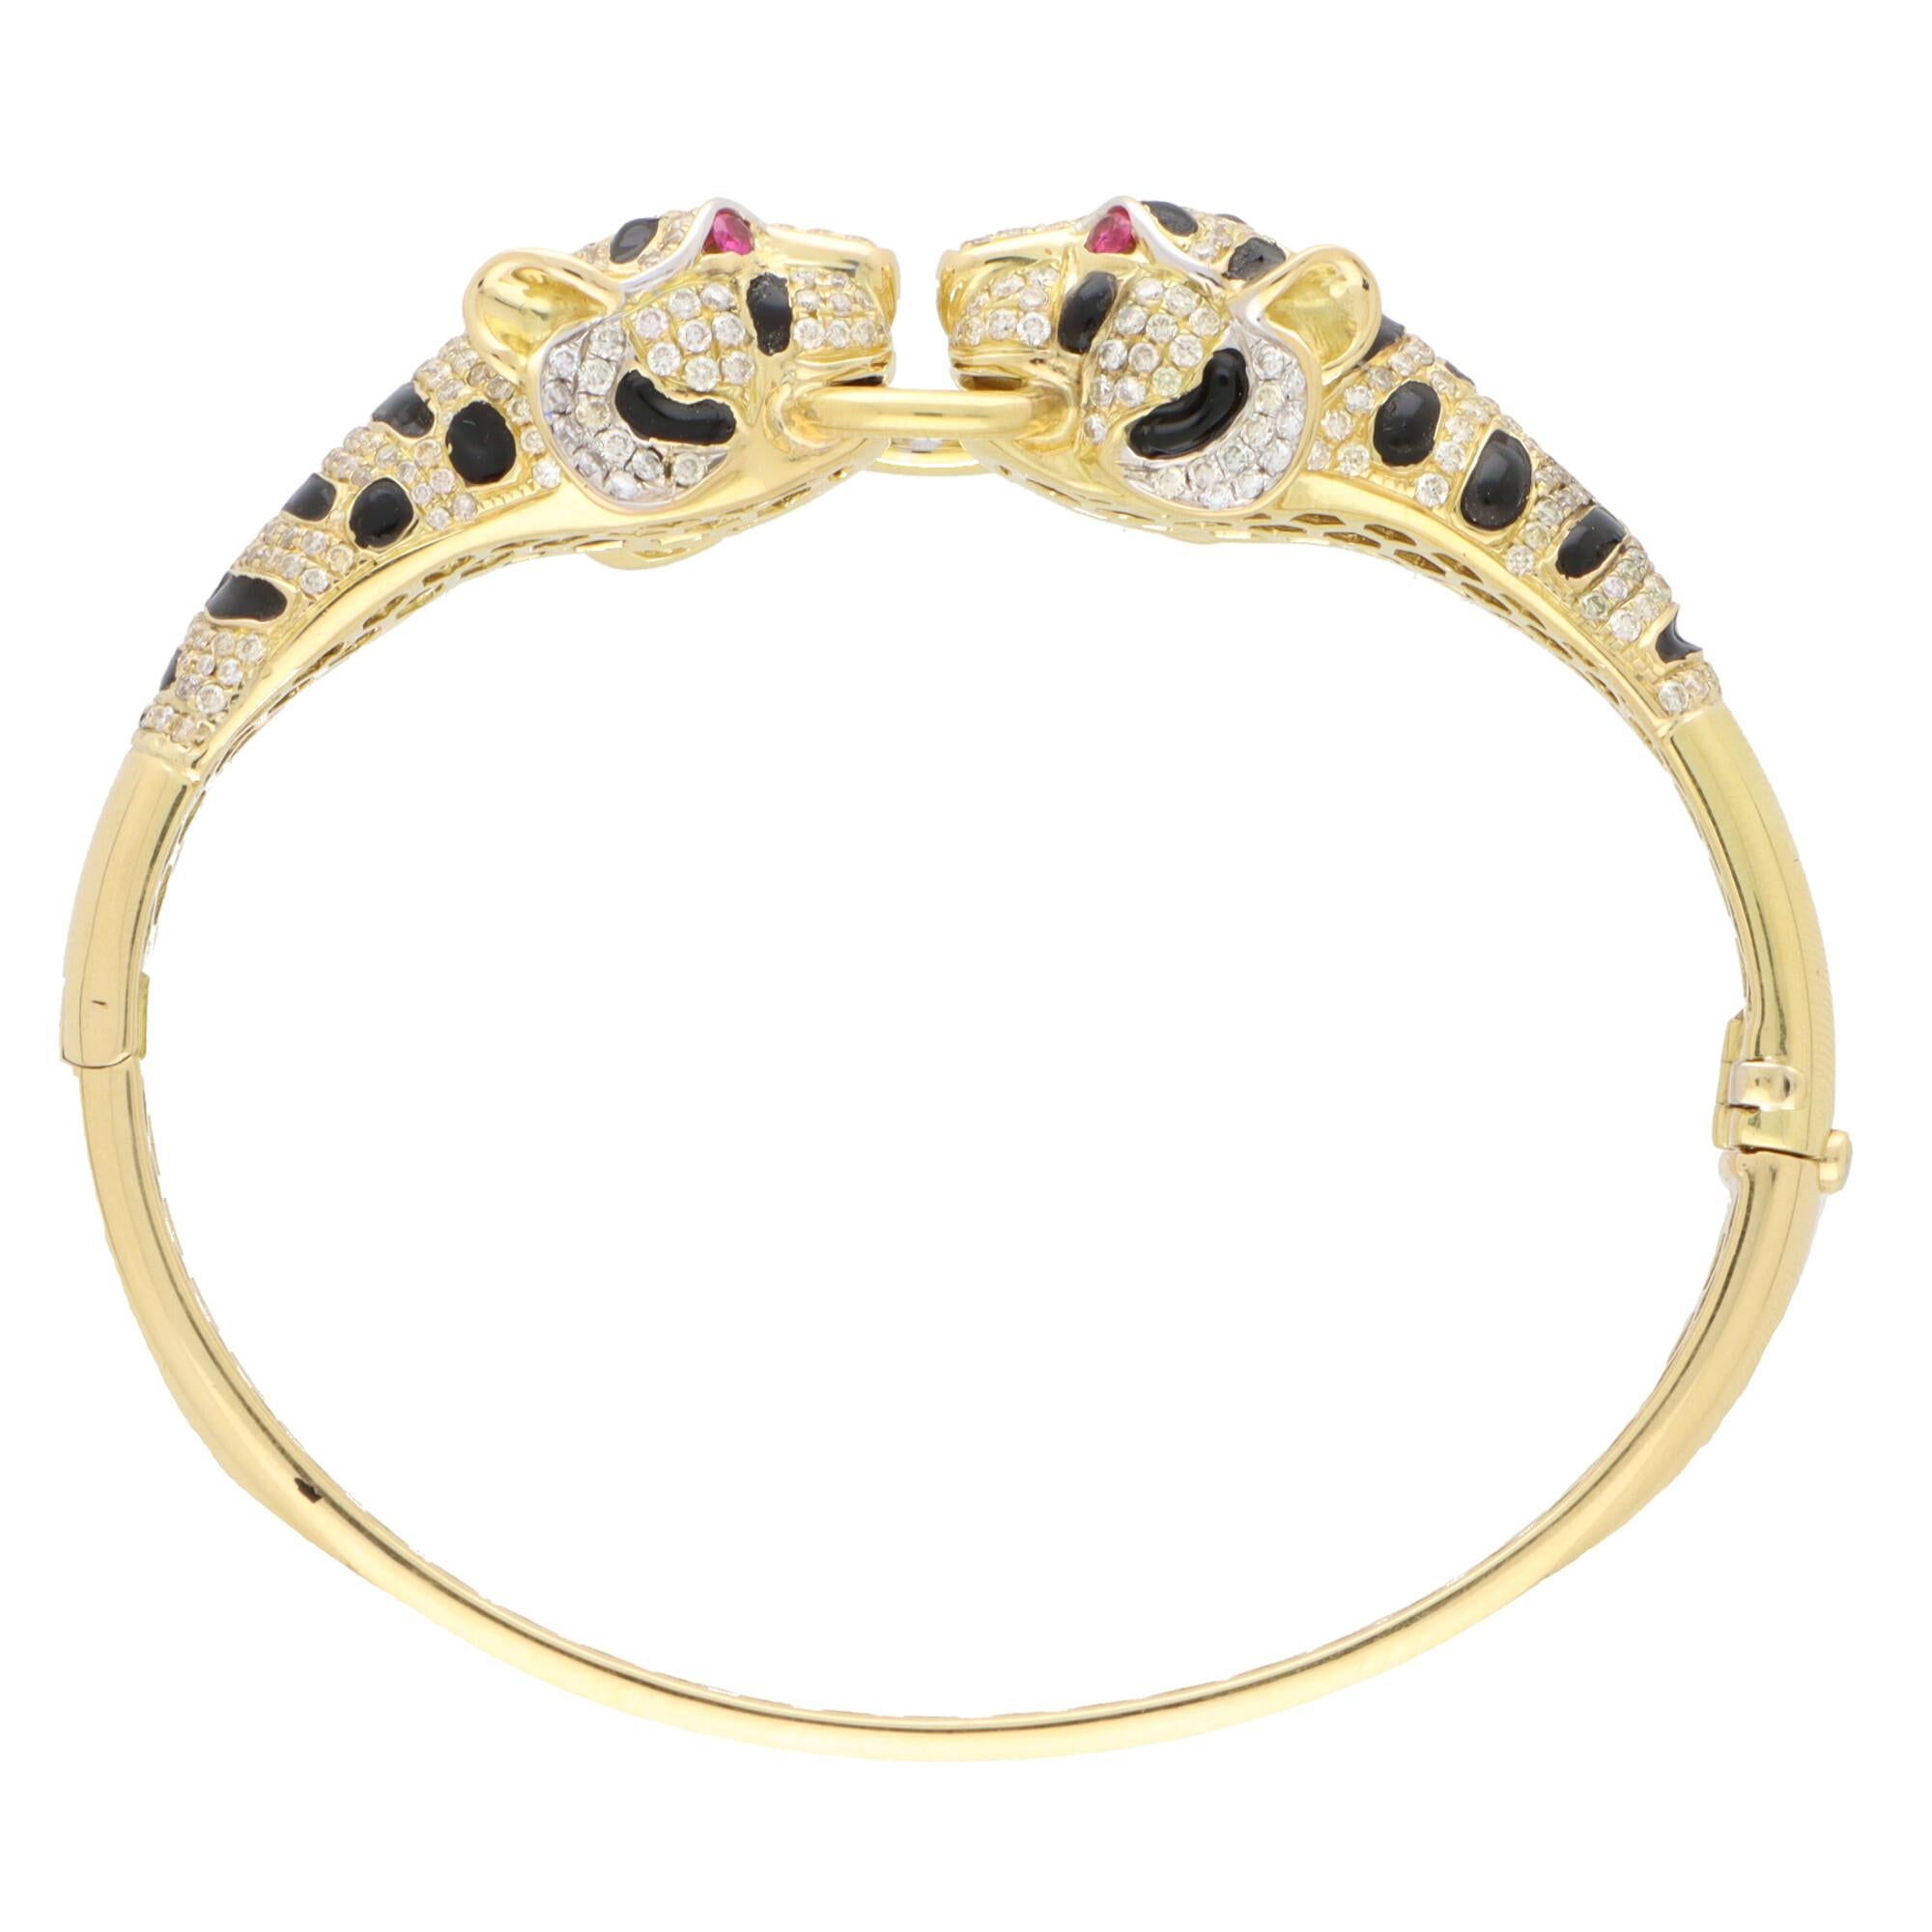 Modern Diamond, Ruby and Enamel Double Headed Tiger Hinged Bangle in 18k Yellow Gold